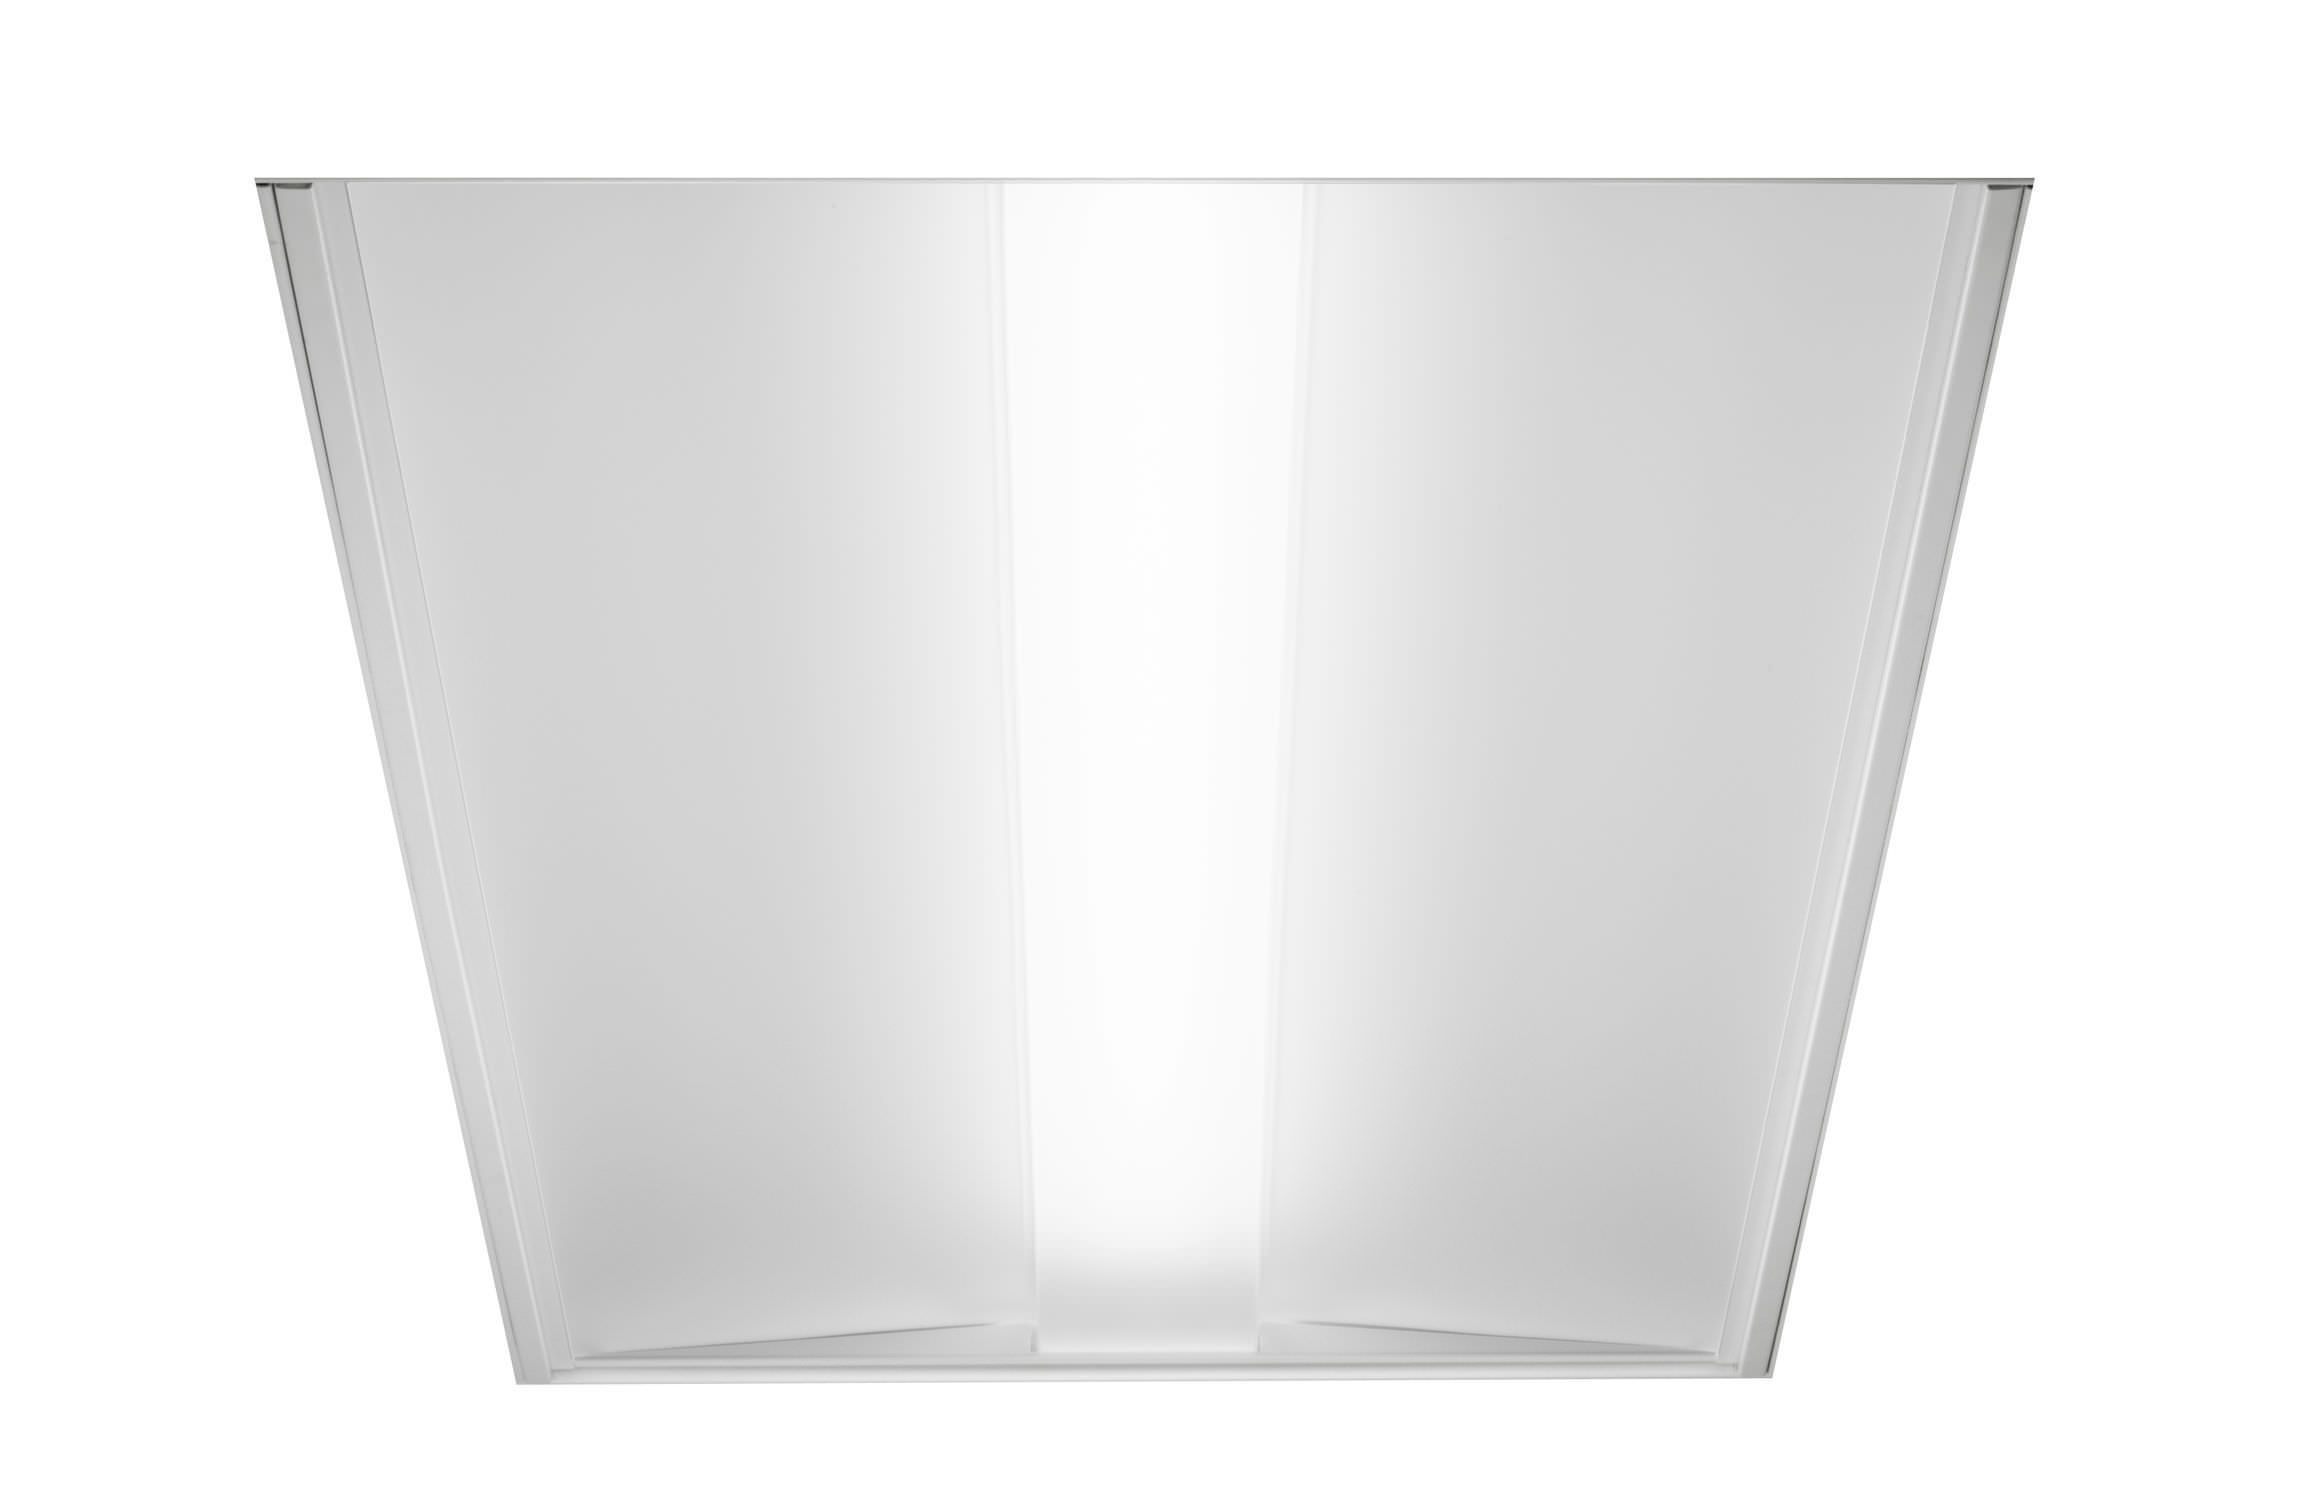 Ceiling-mounted lighting / for healthcare facilities / LED LITEWAVE HE LED Litecontrol Corporation